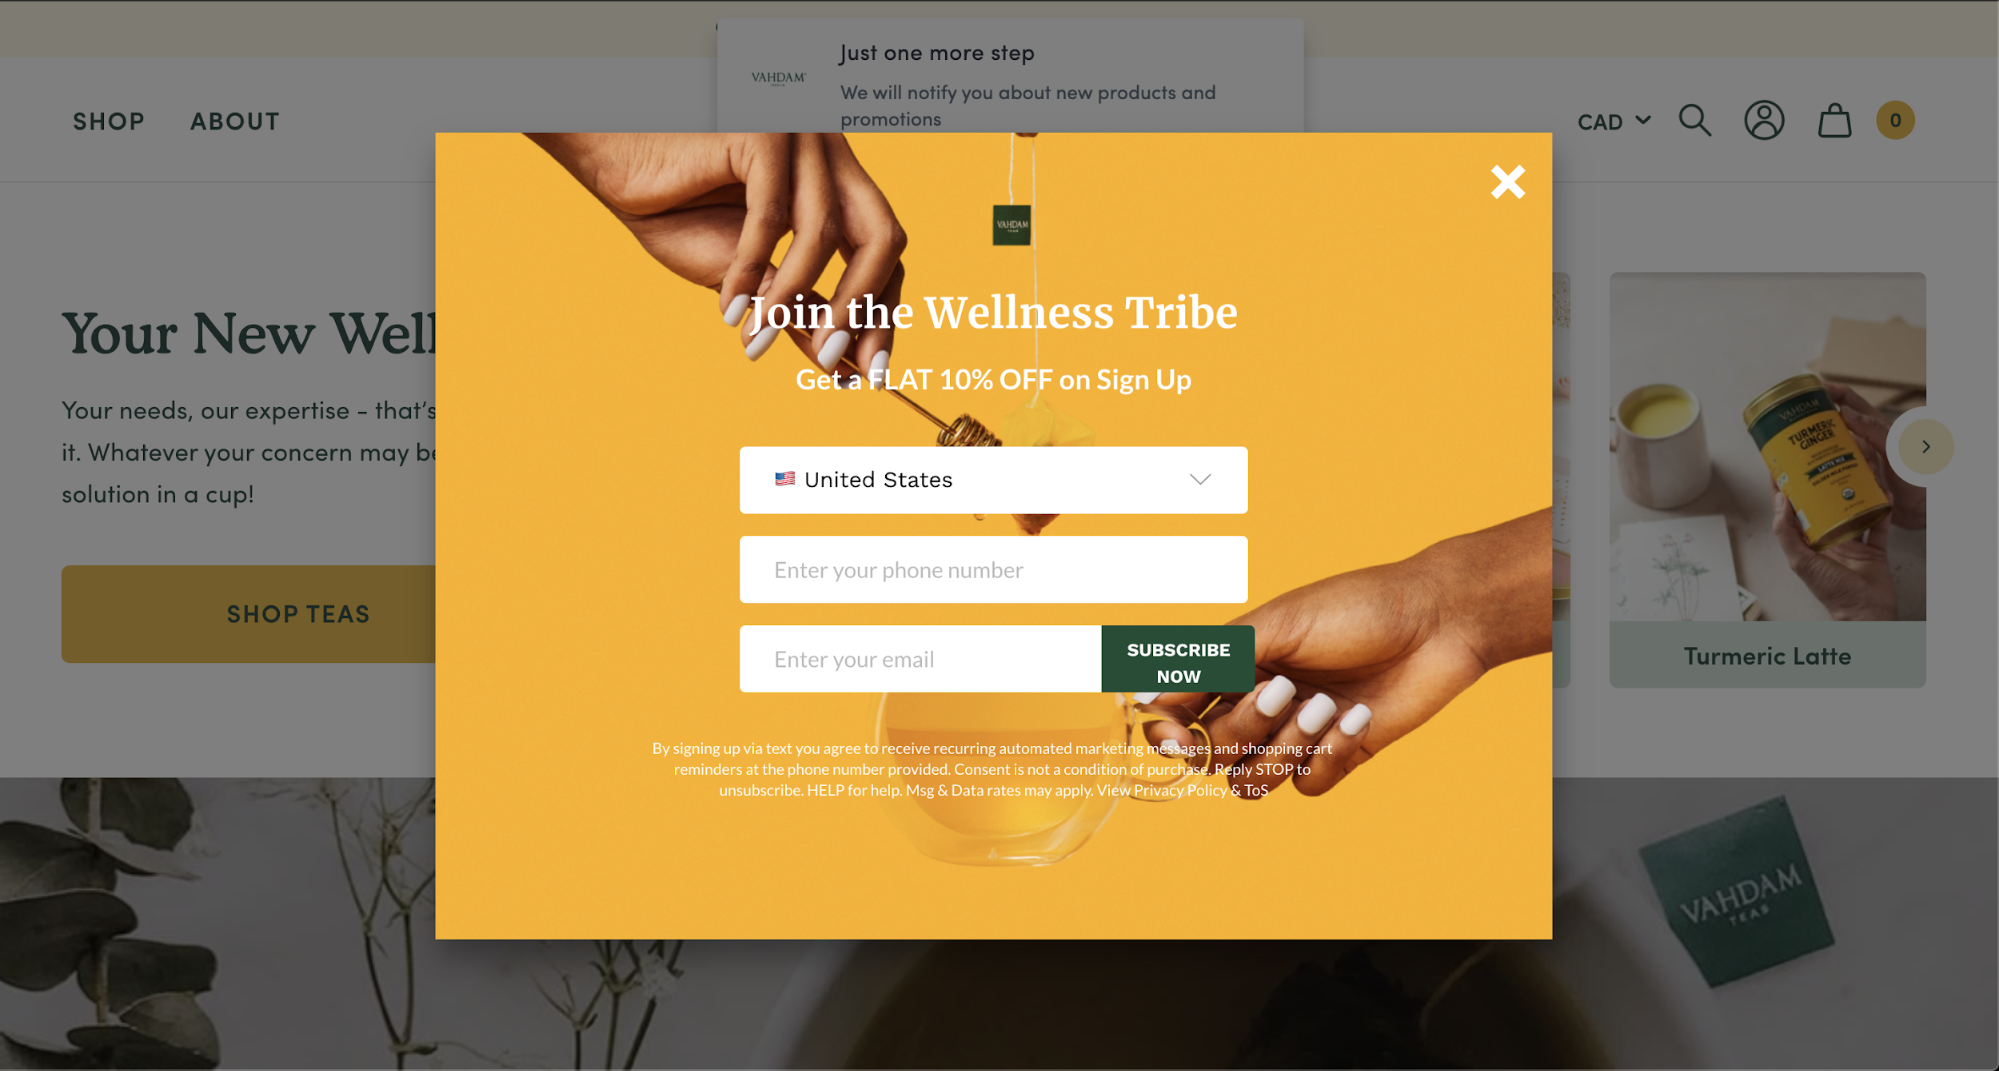 an email opt-in pop-up from vahdam teas